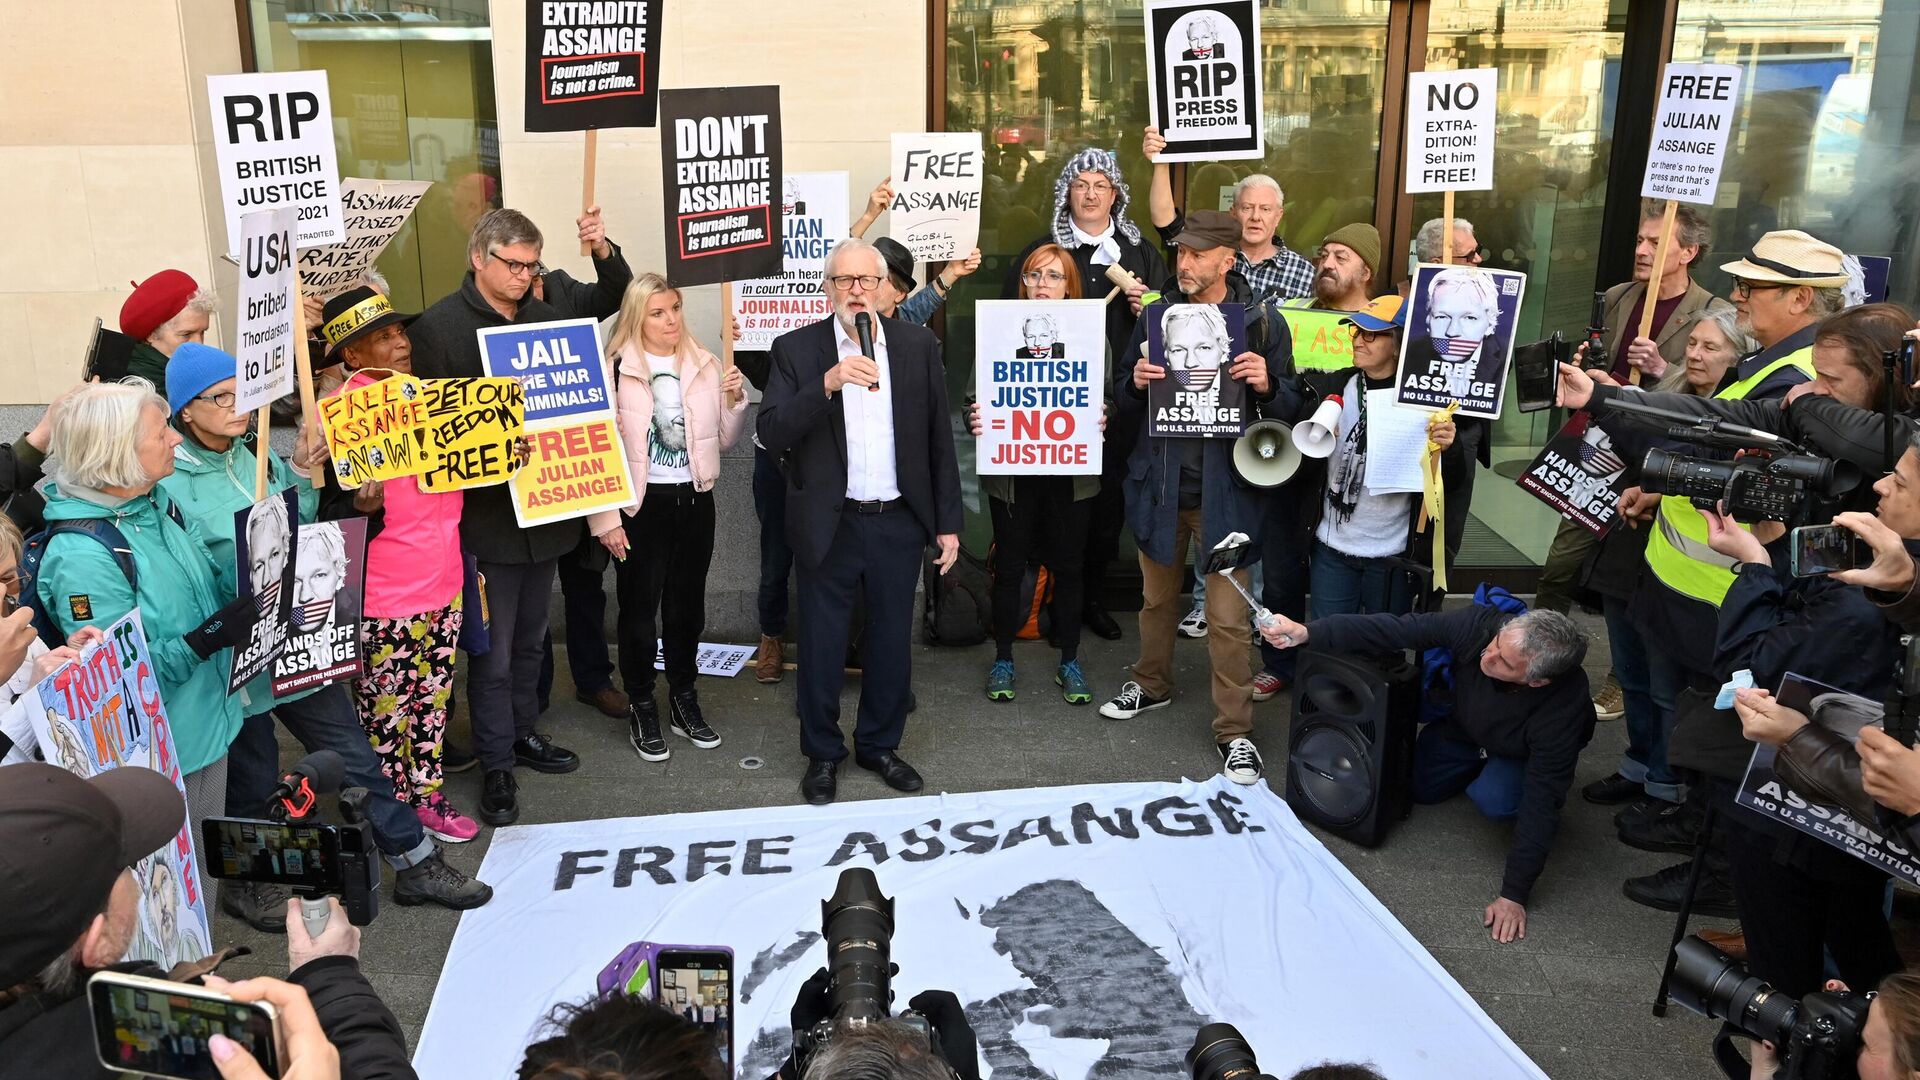 Former leader of Britain's opposition Labour party Jeremy Corbyn addresses supporters of WikiLeaks founder Julian Assange outside Westminster Magistrates court in London on April 20, 2022, where Assange is set to appear pending an extradition request from the US - Sputnik International, 1920, 20.04.2022